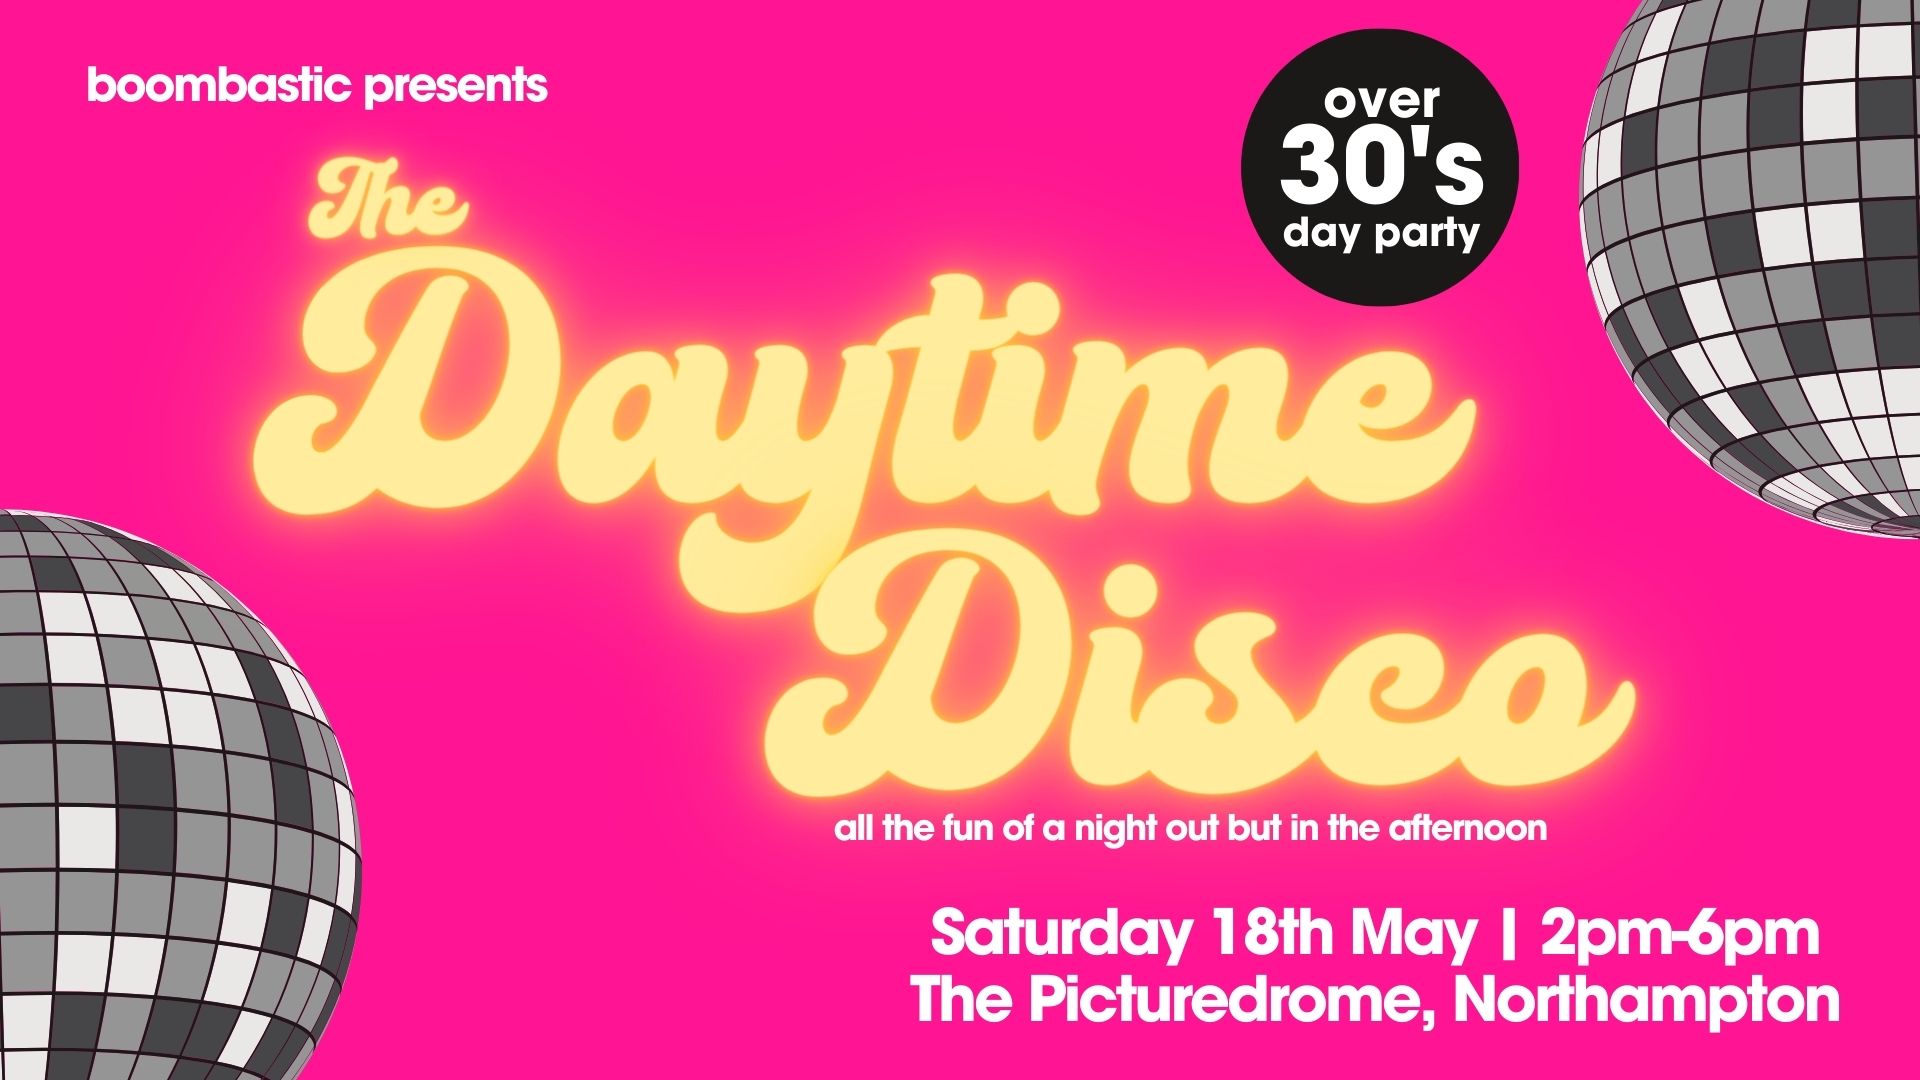 Boombastic Presents: DAYTIME DISCO - For the Over 30s Crowd